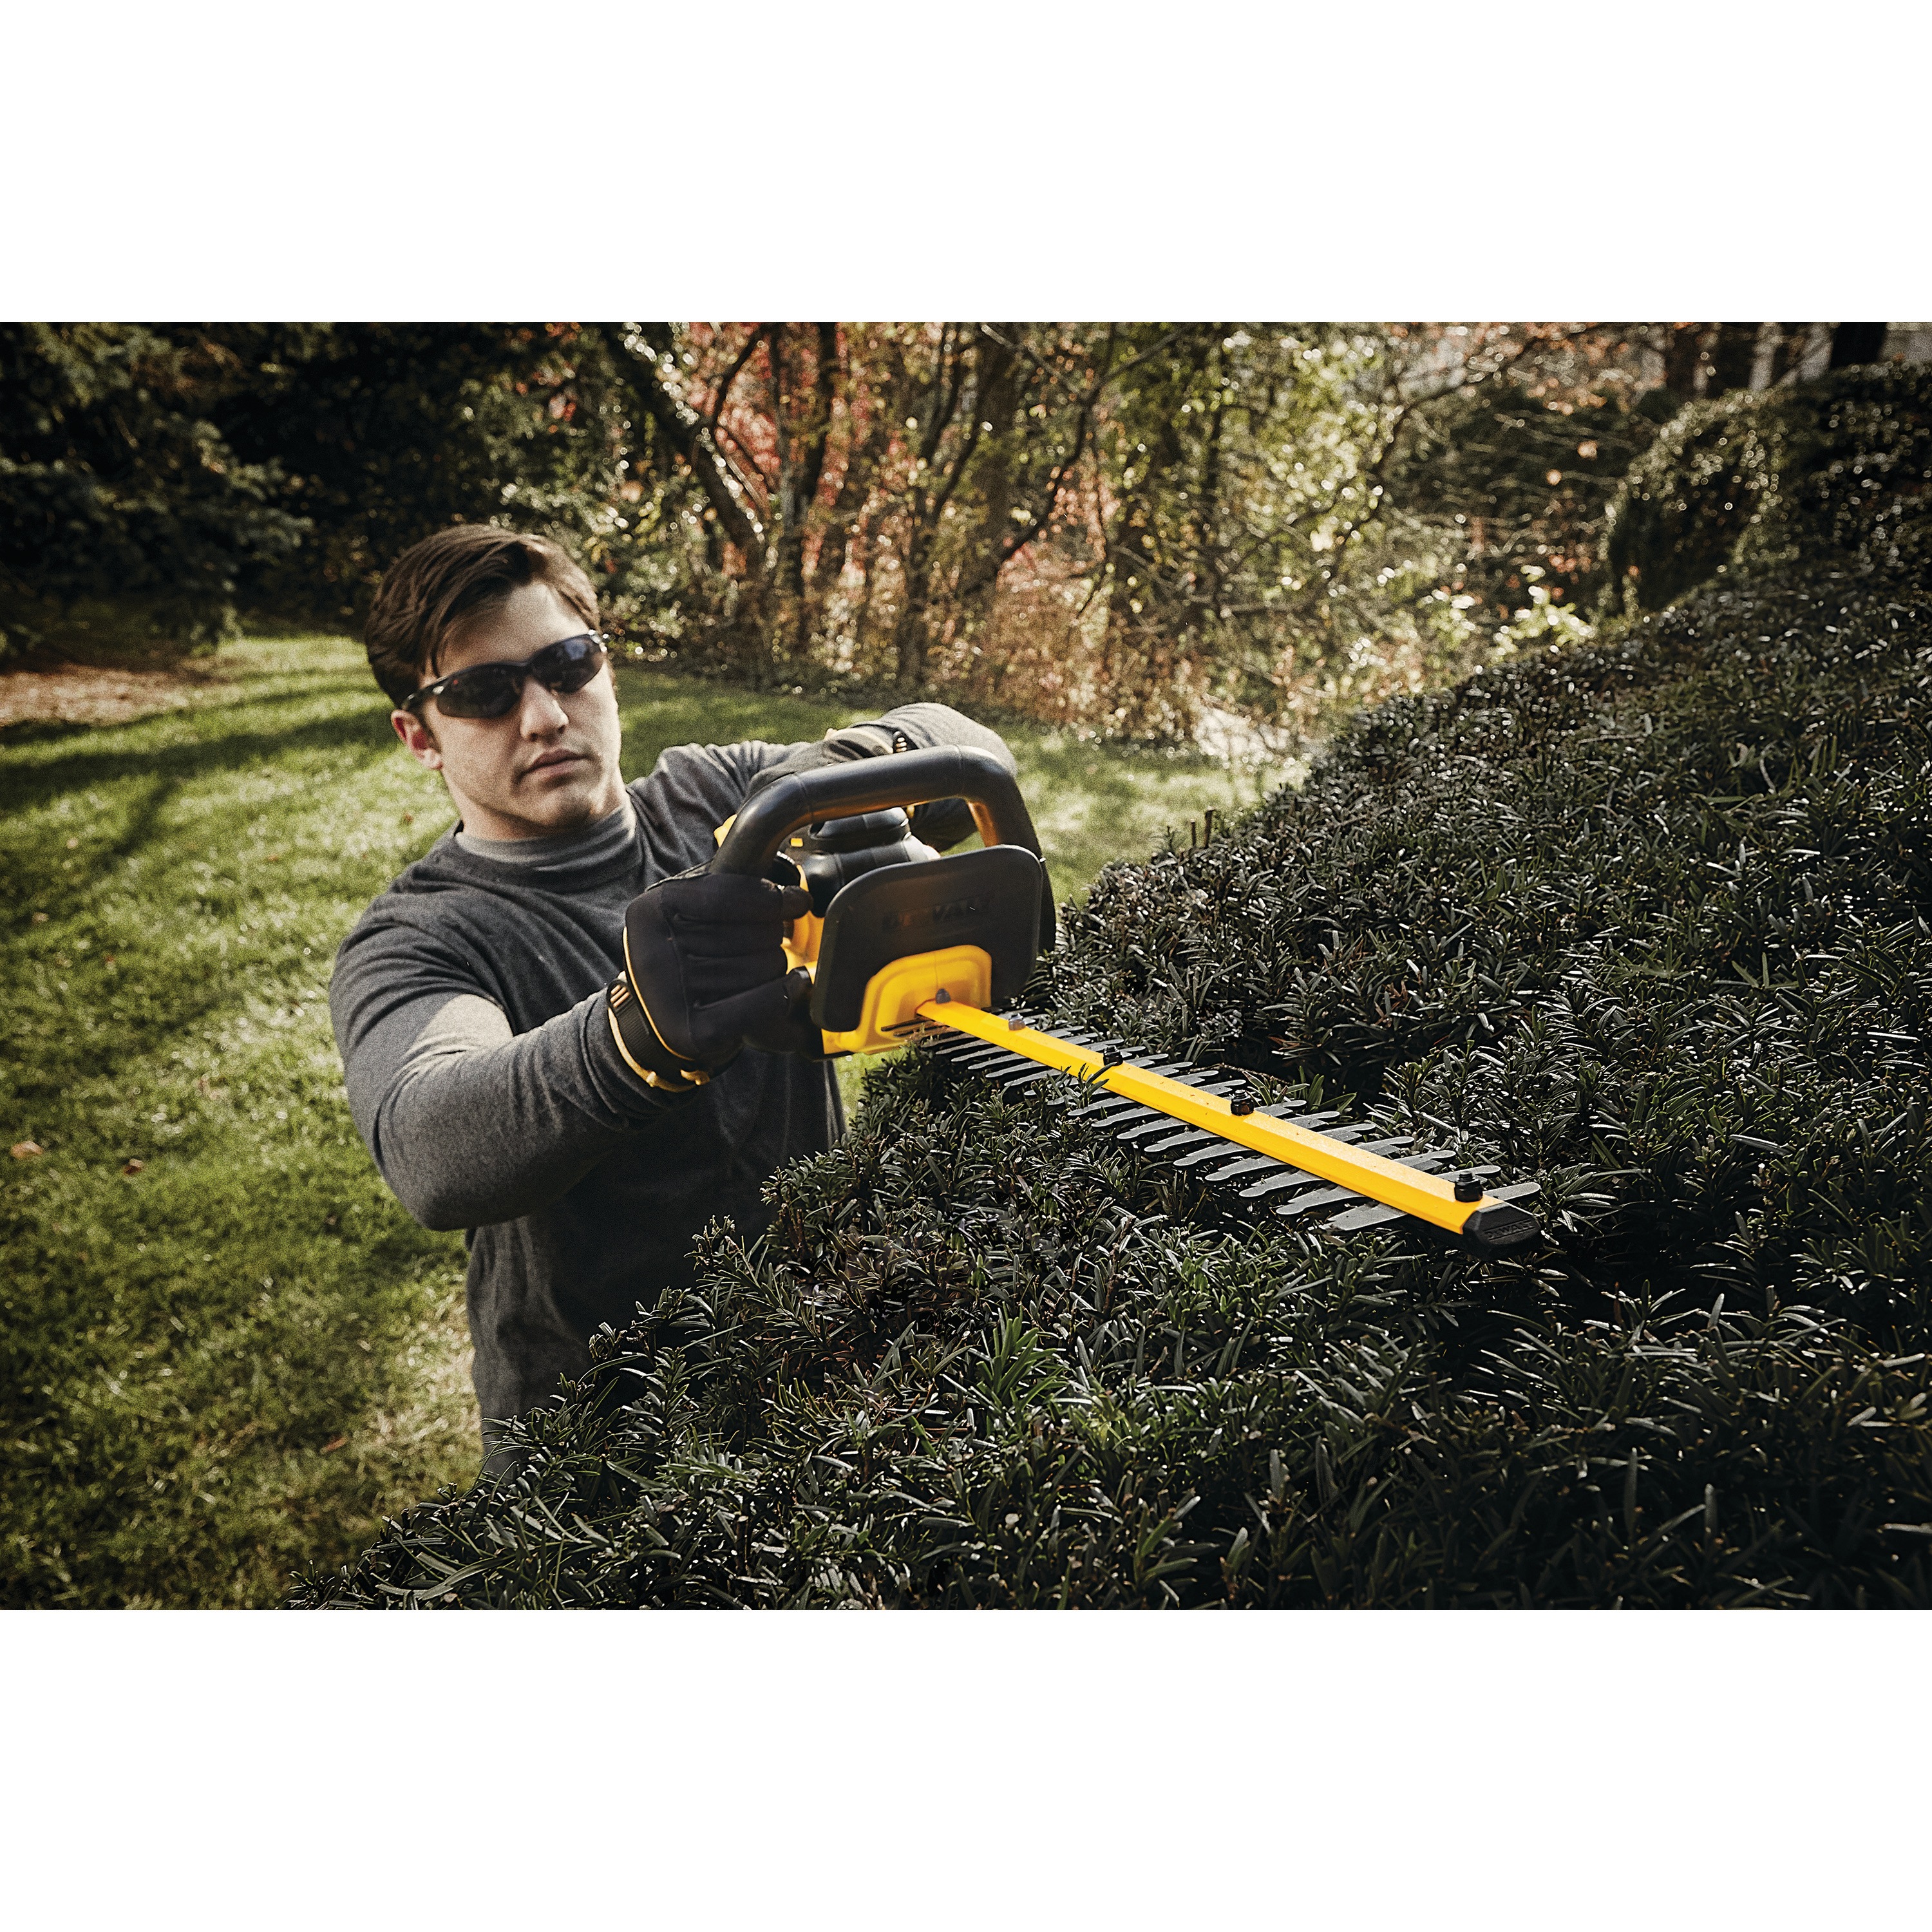 Lithium ion hedge trimmer being used by a person 